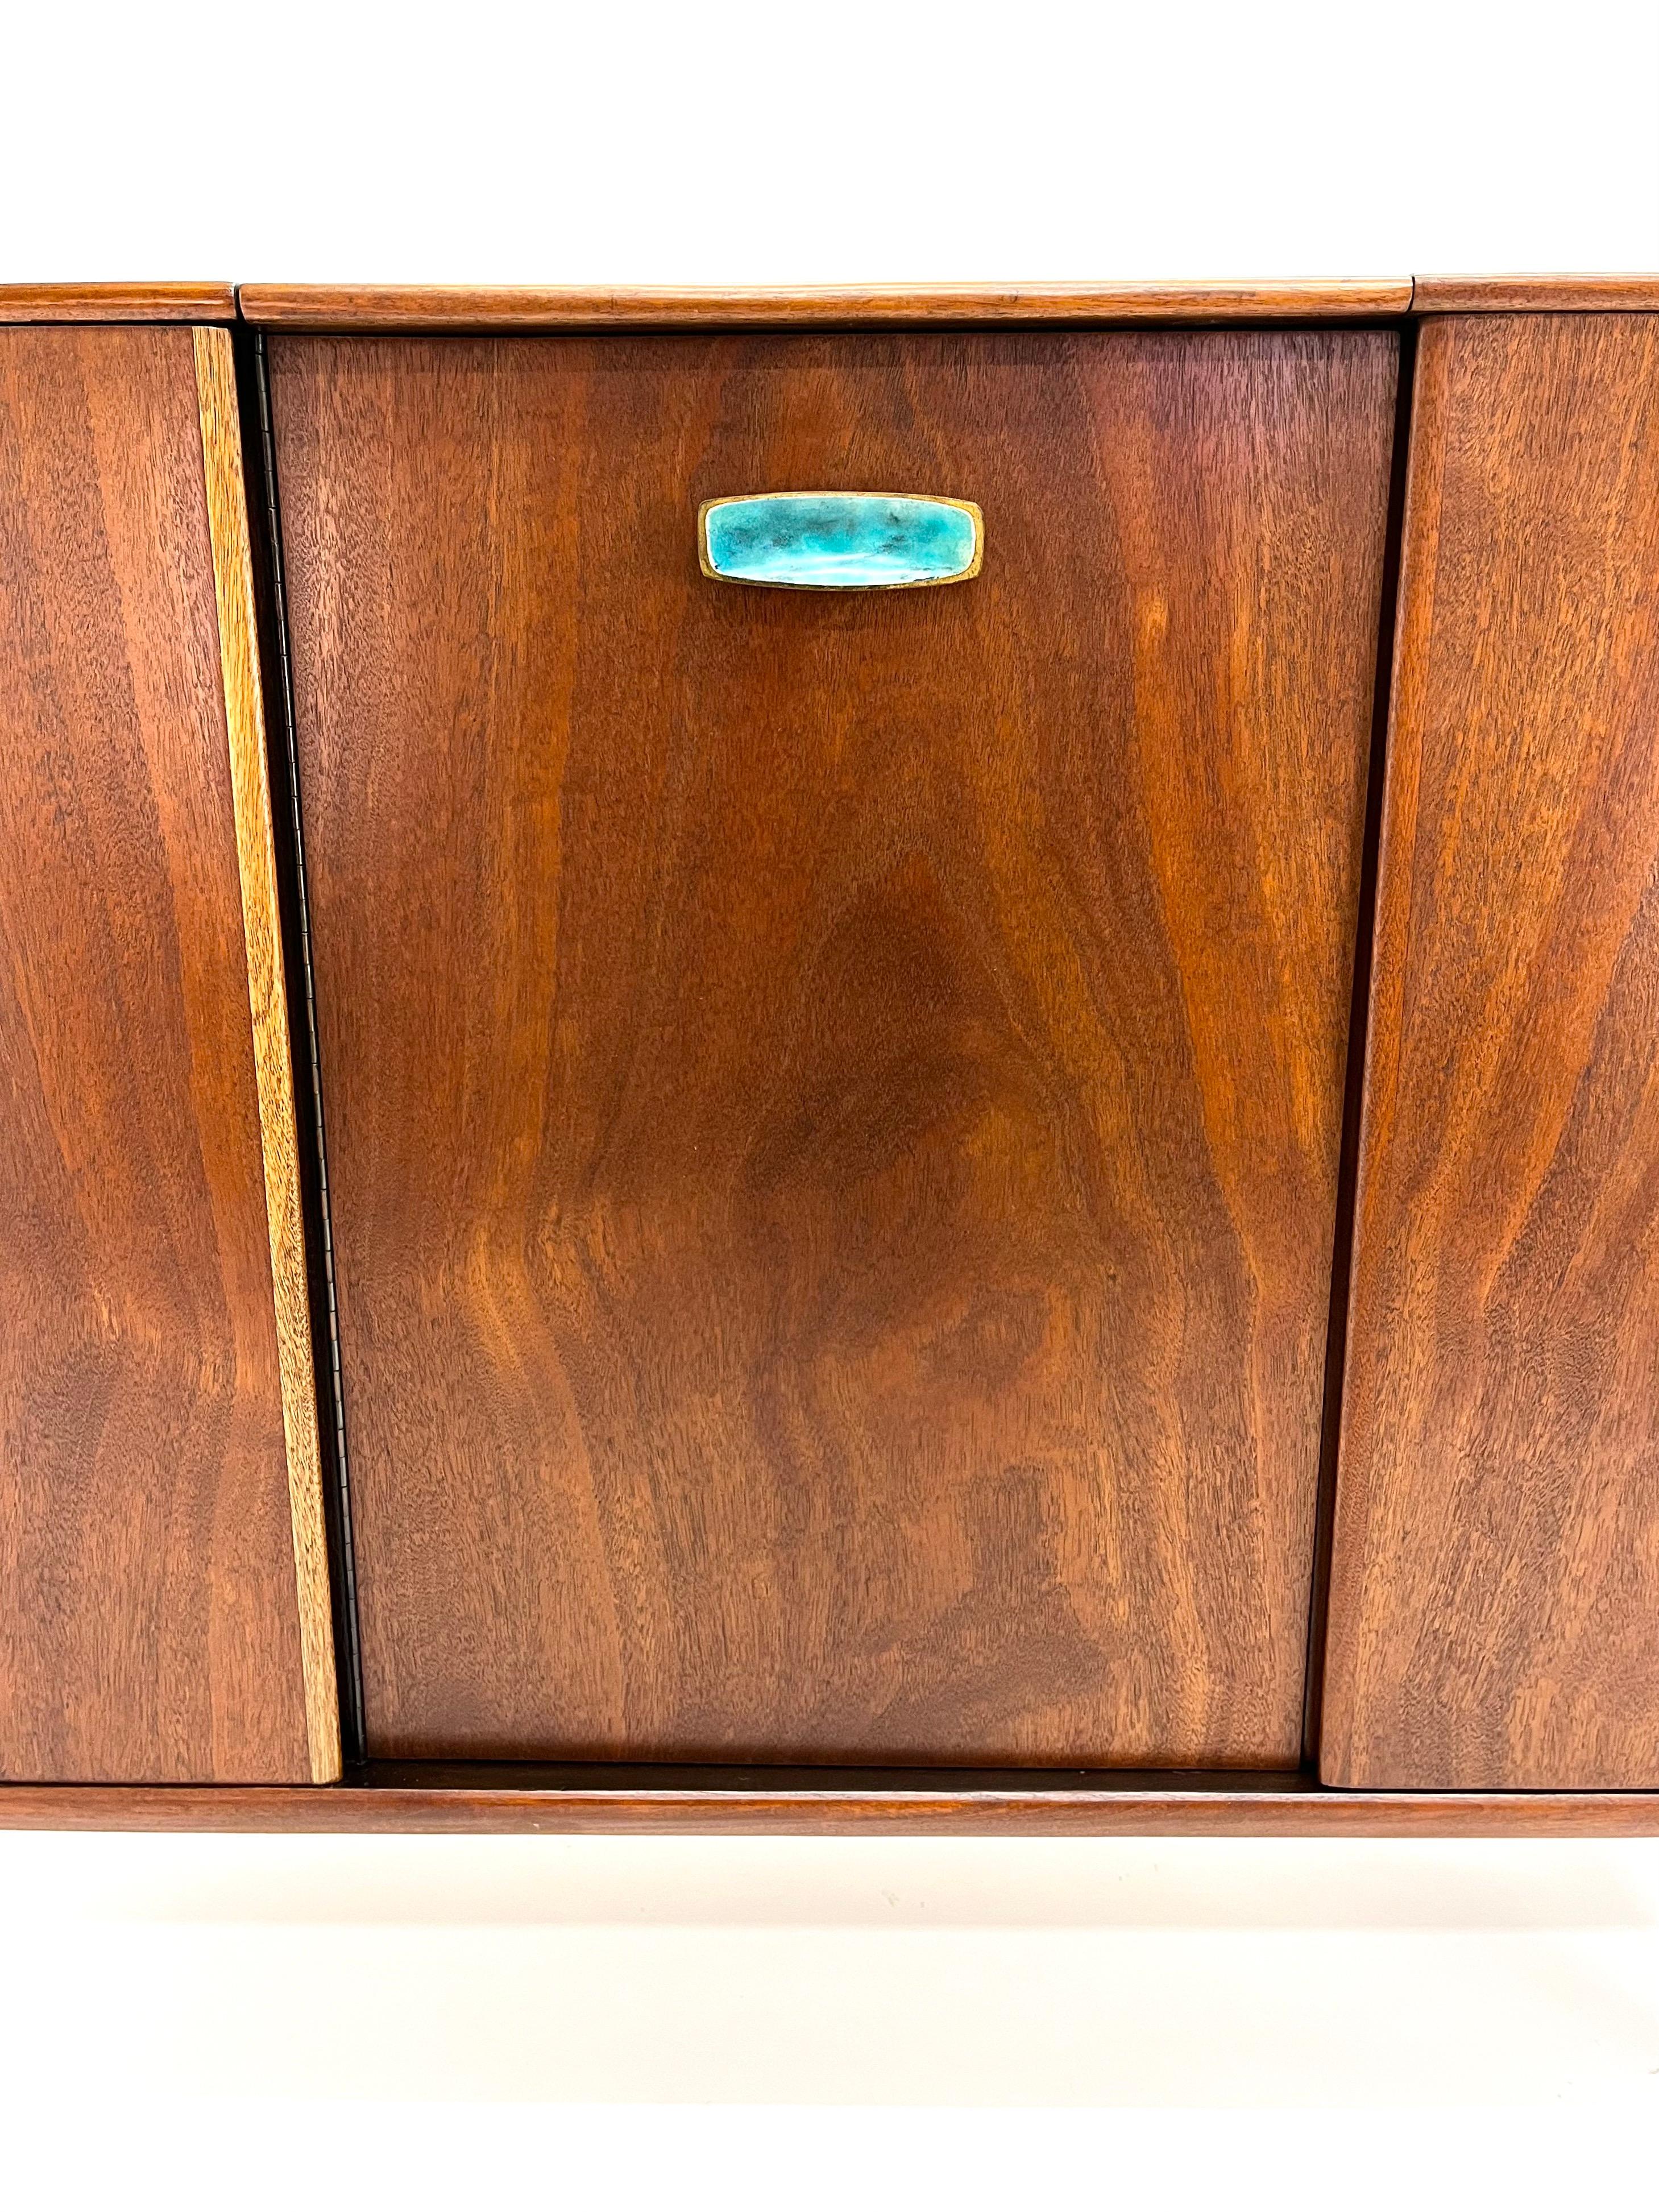 American Ray Sabota for Mt. Airy Gentleman's Cabinet w/ Vanity For Sale